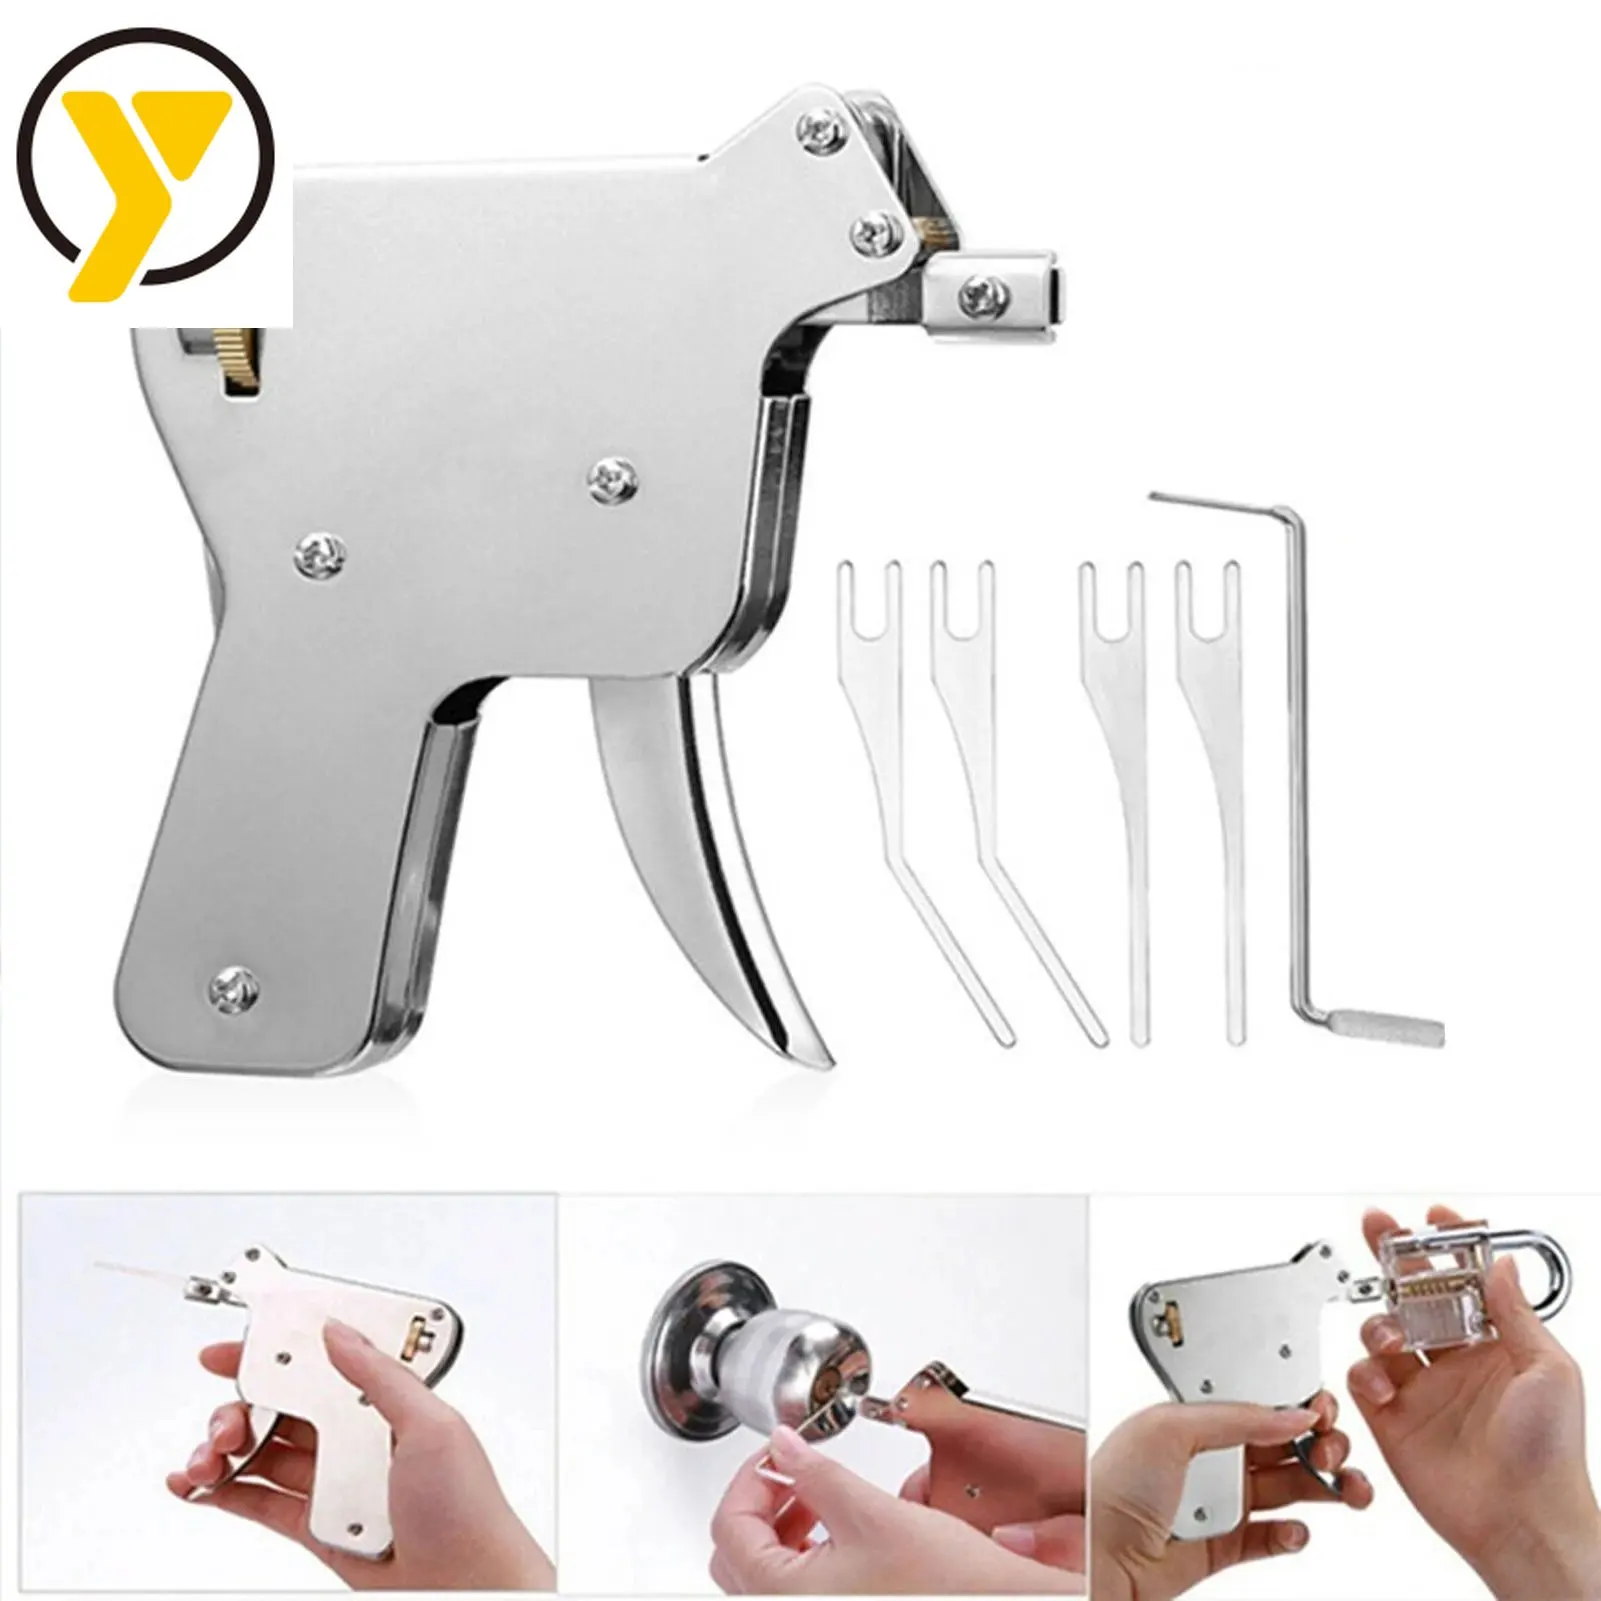 

1 Set Padlock Open Tools Set Parts Professional Use with Tip Lock Opener Strong Steel Lock Picking Tools Set Extractor Training